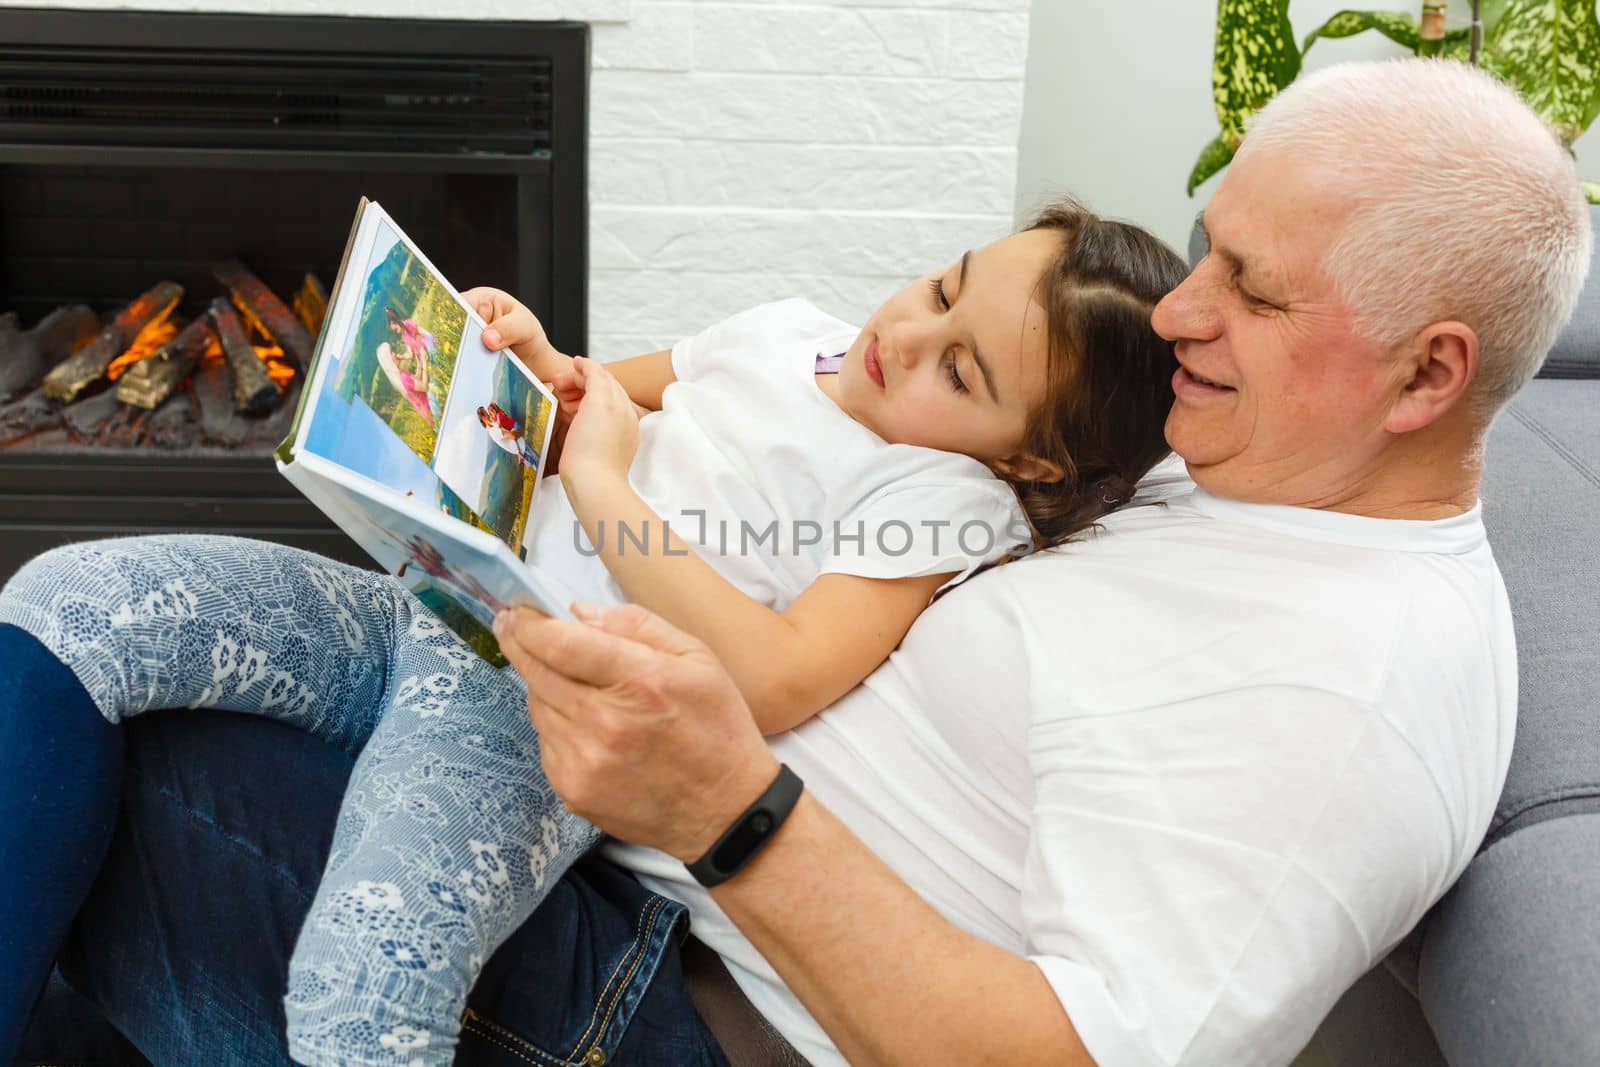 Grandfather And Granddaughter Looking Through Photo Album In Lounge At Home Together by Andelov13